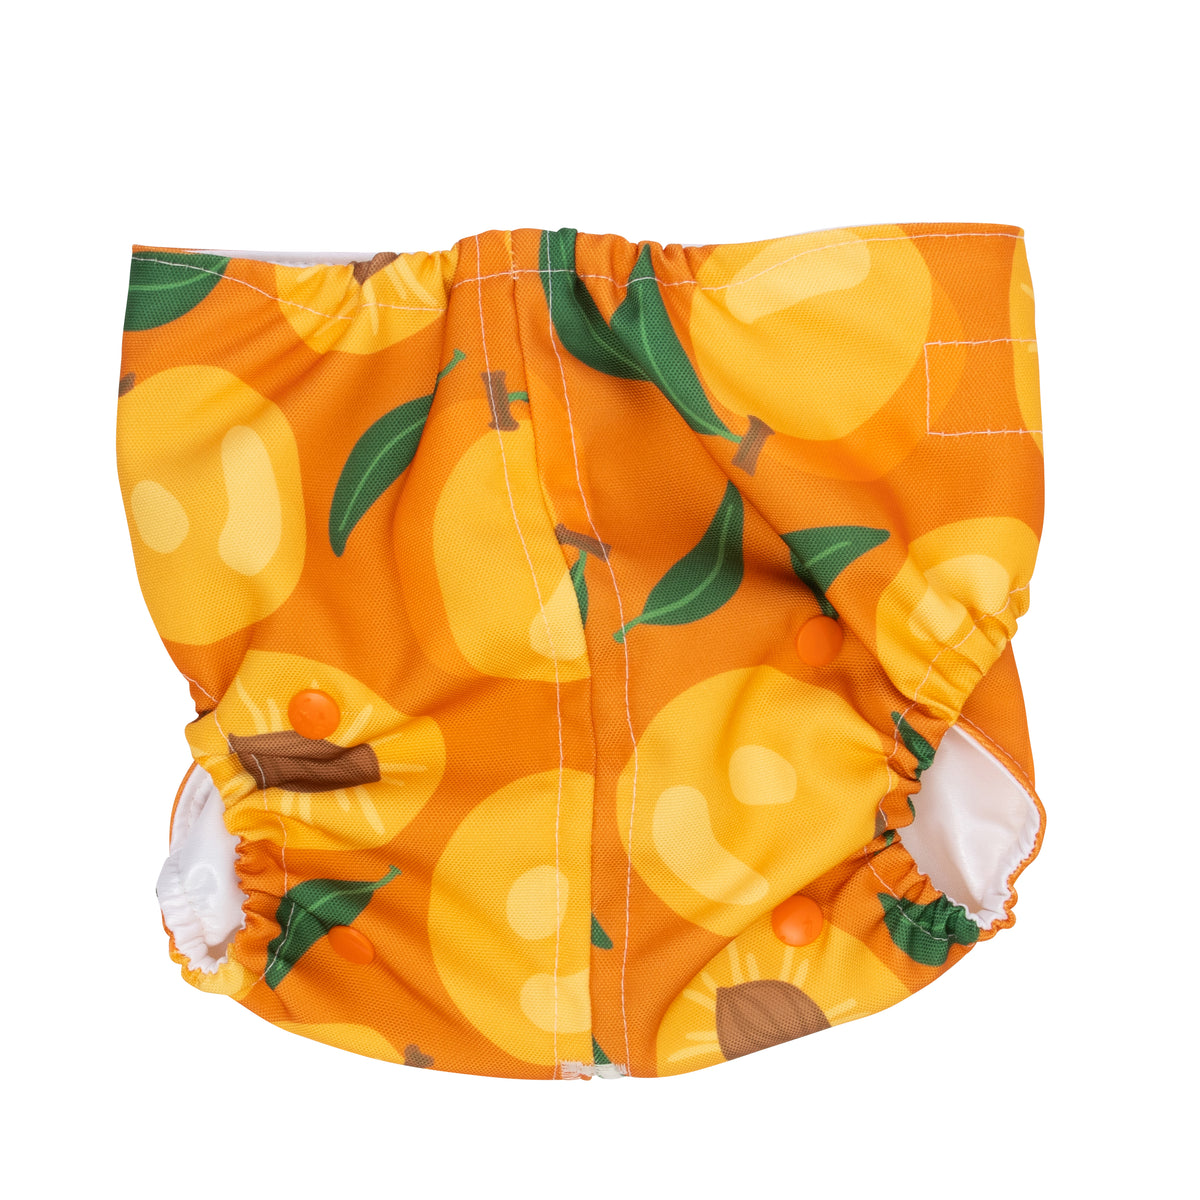 Dundies Apricot Jam All In One Nappy (AIO)